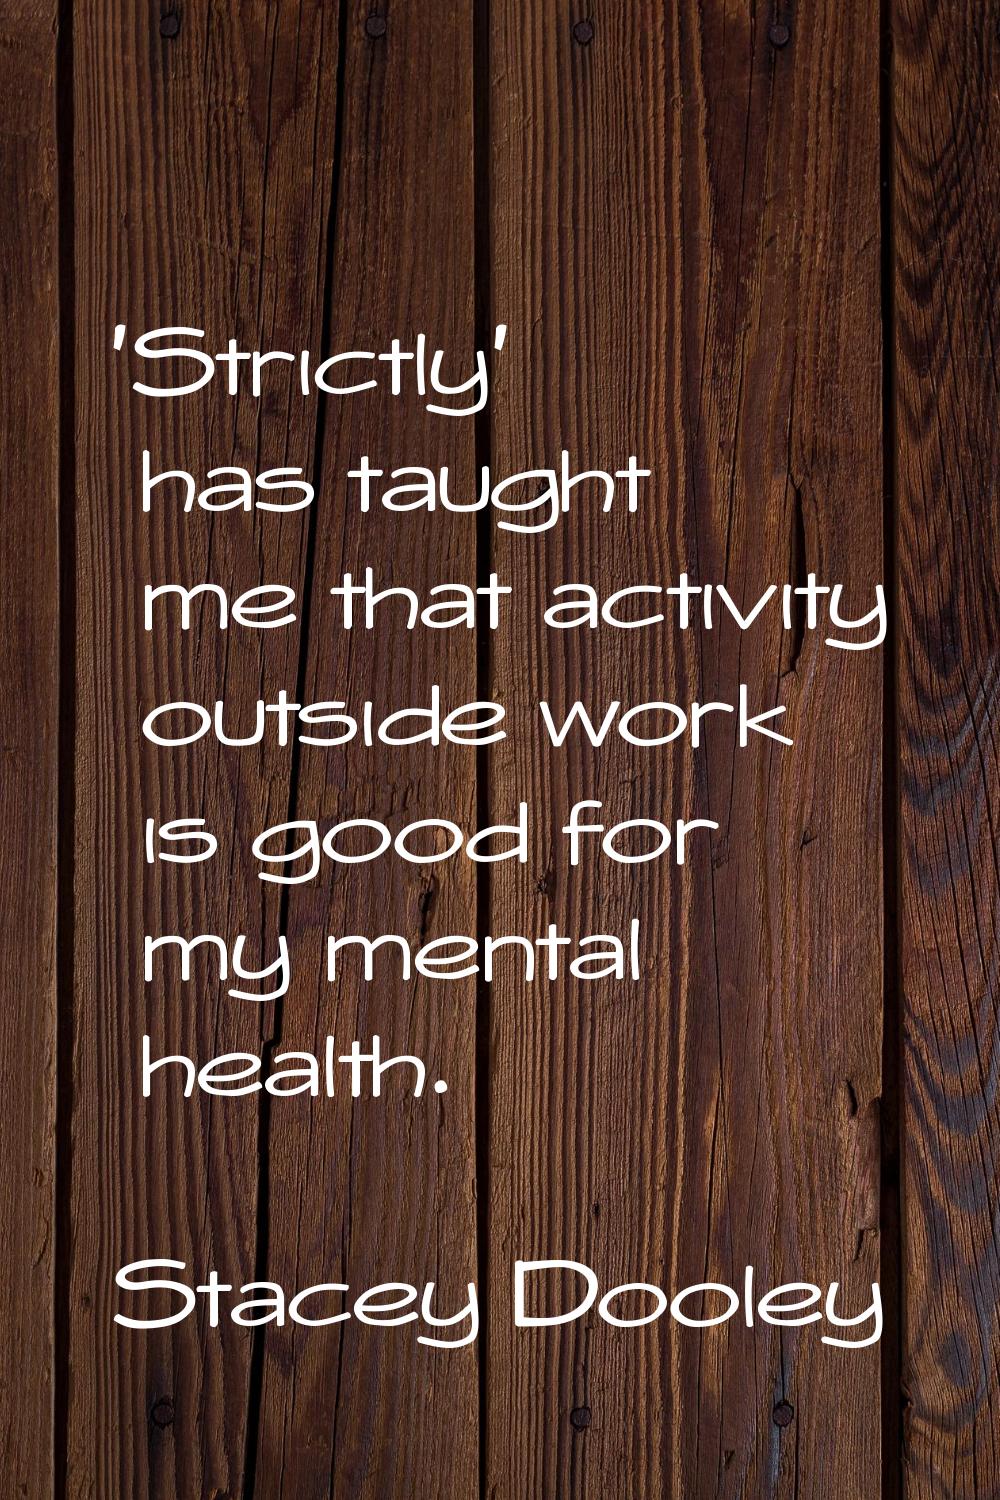 'Strictly' has taught me that activity outside work is good for my mental health.